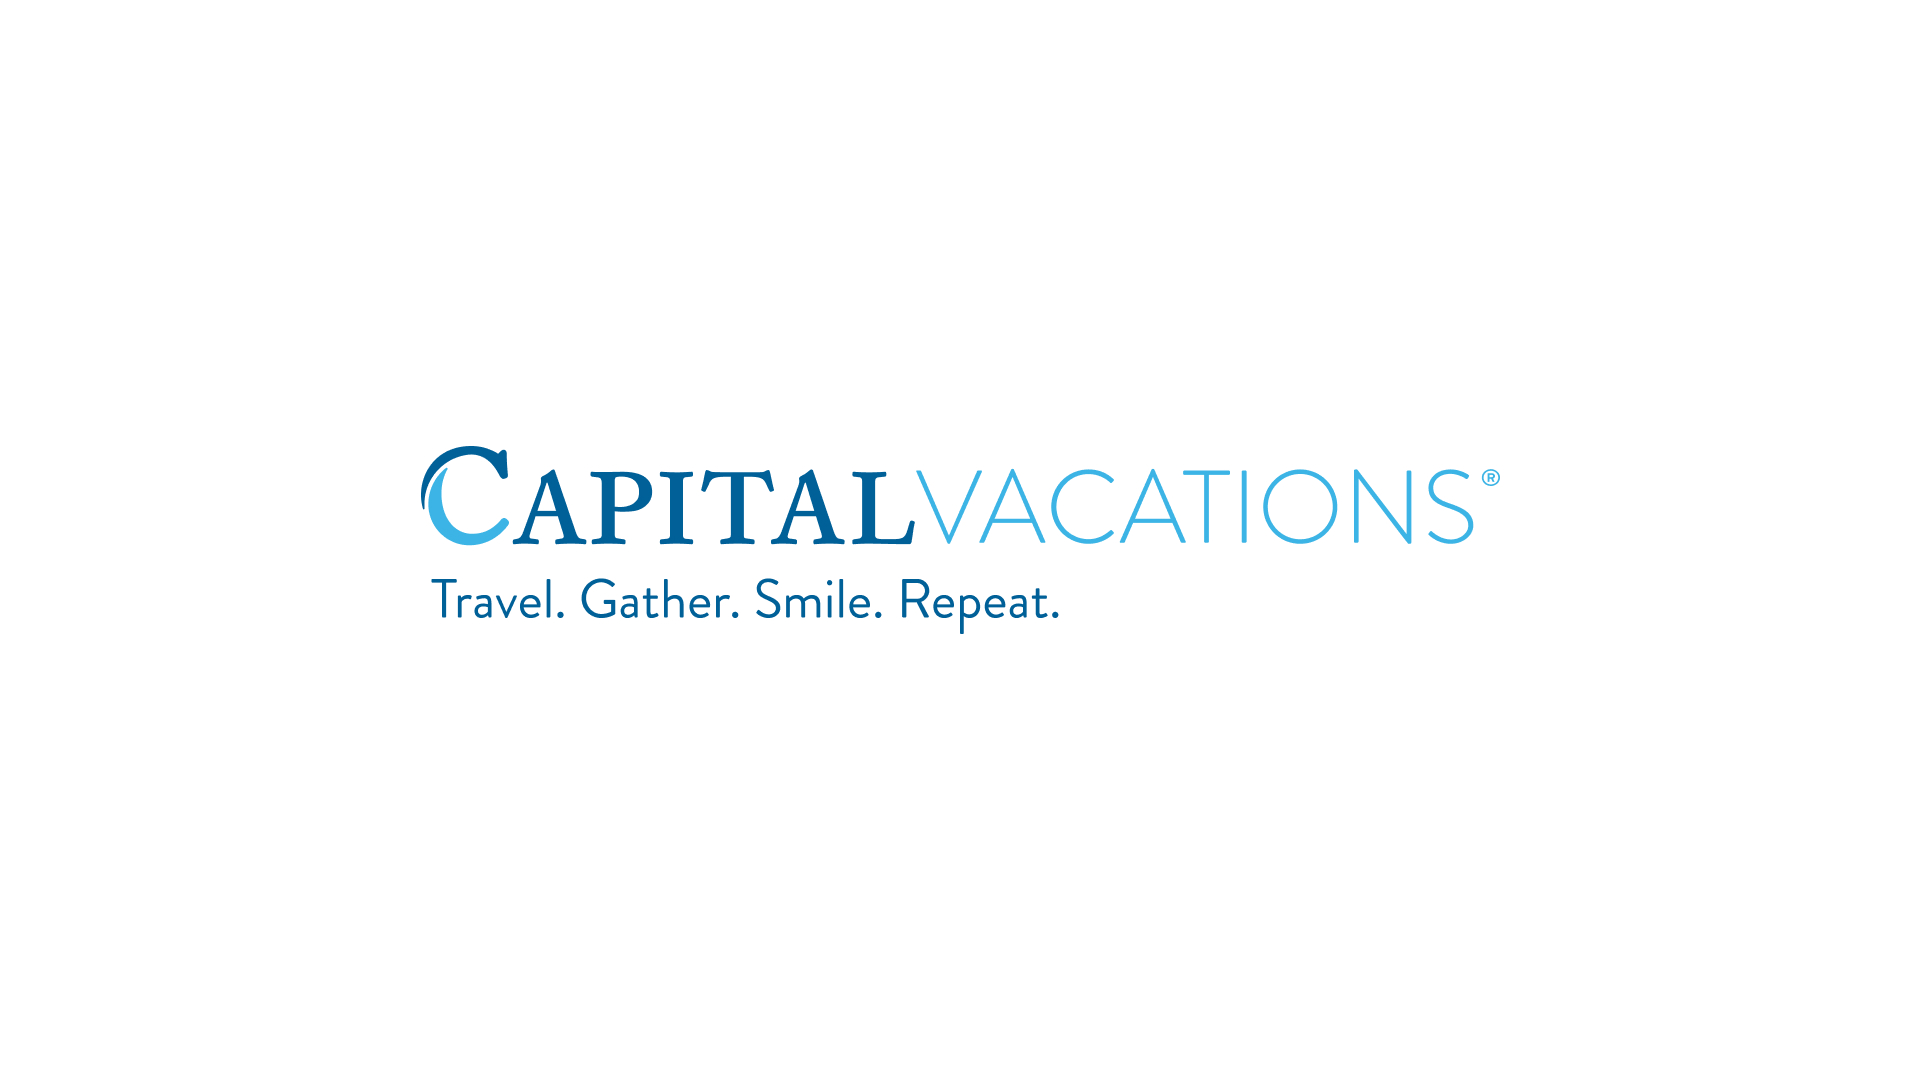 Capital Vacations® Announces New Company Purpose